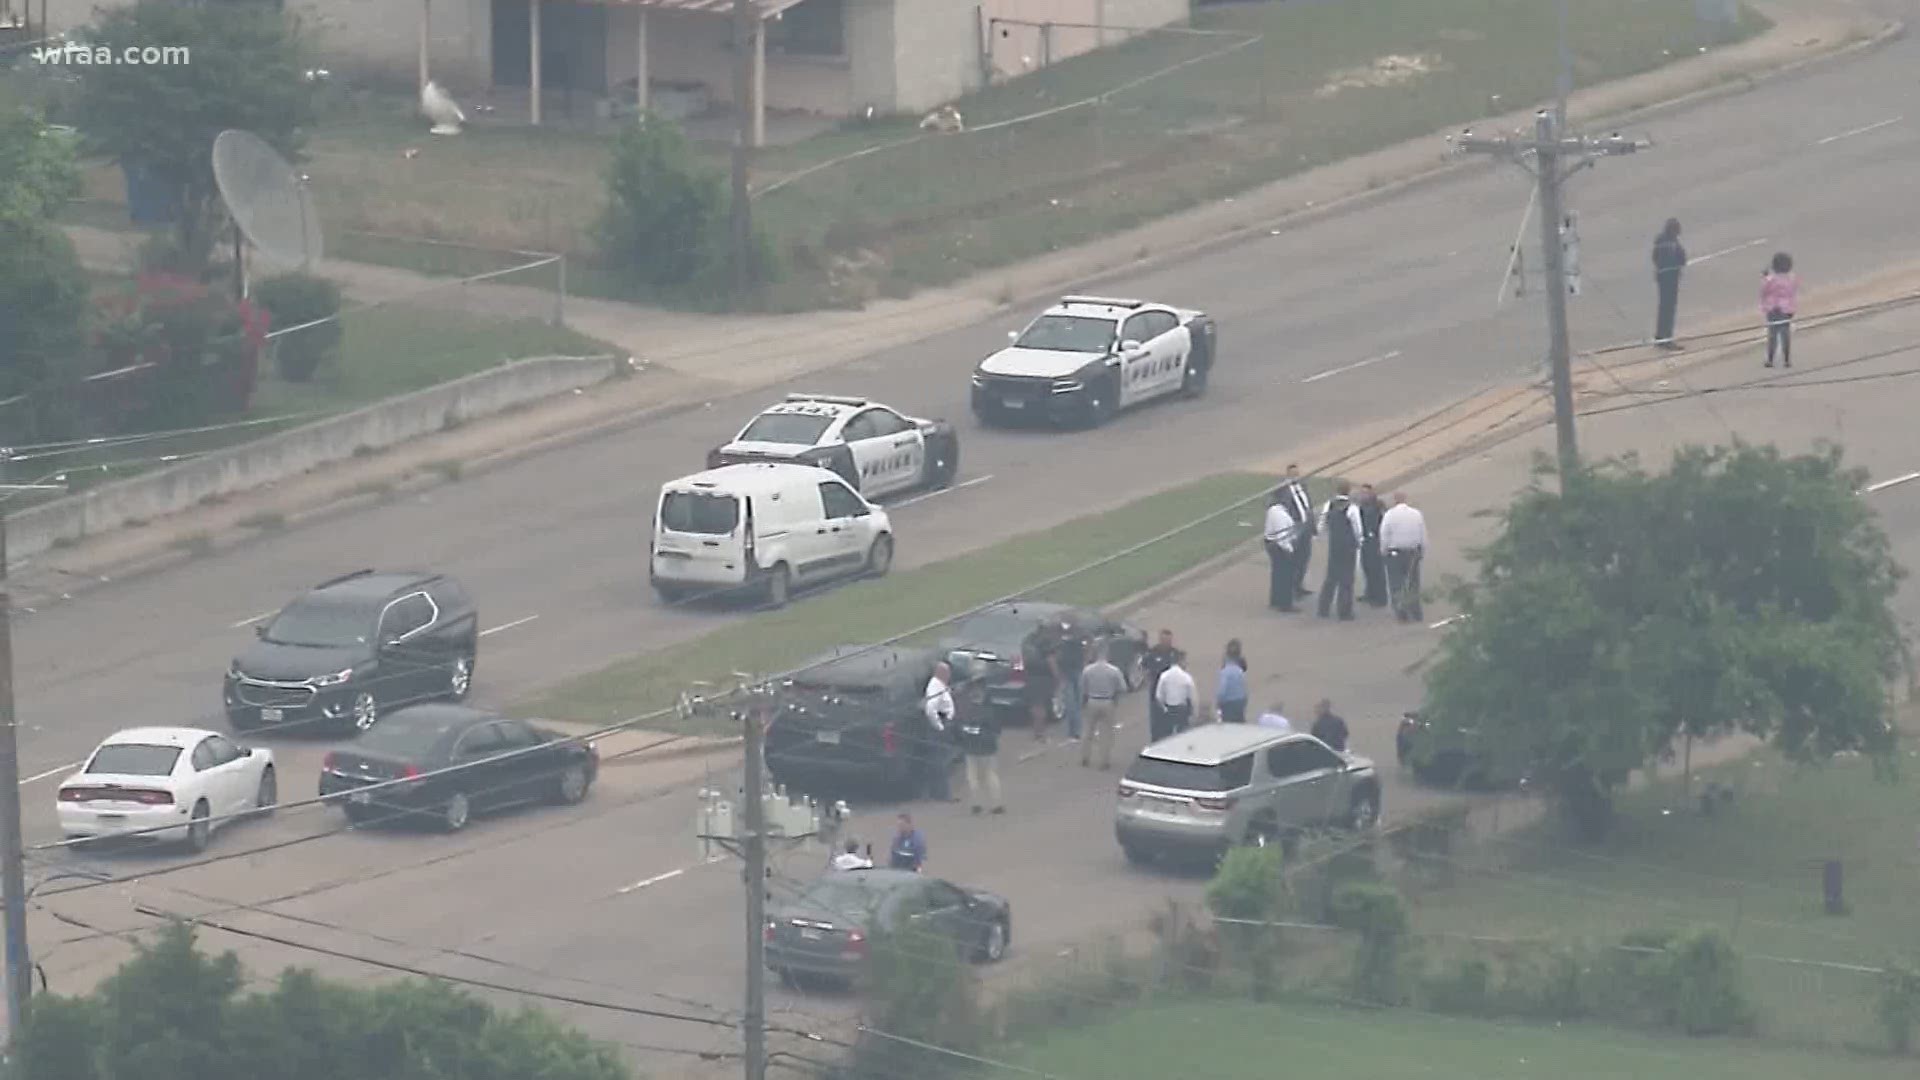 The man was transported to the hospital after being shot in the arm. He is expected to survive, Dallas police say.